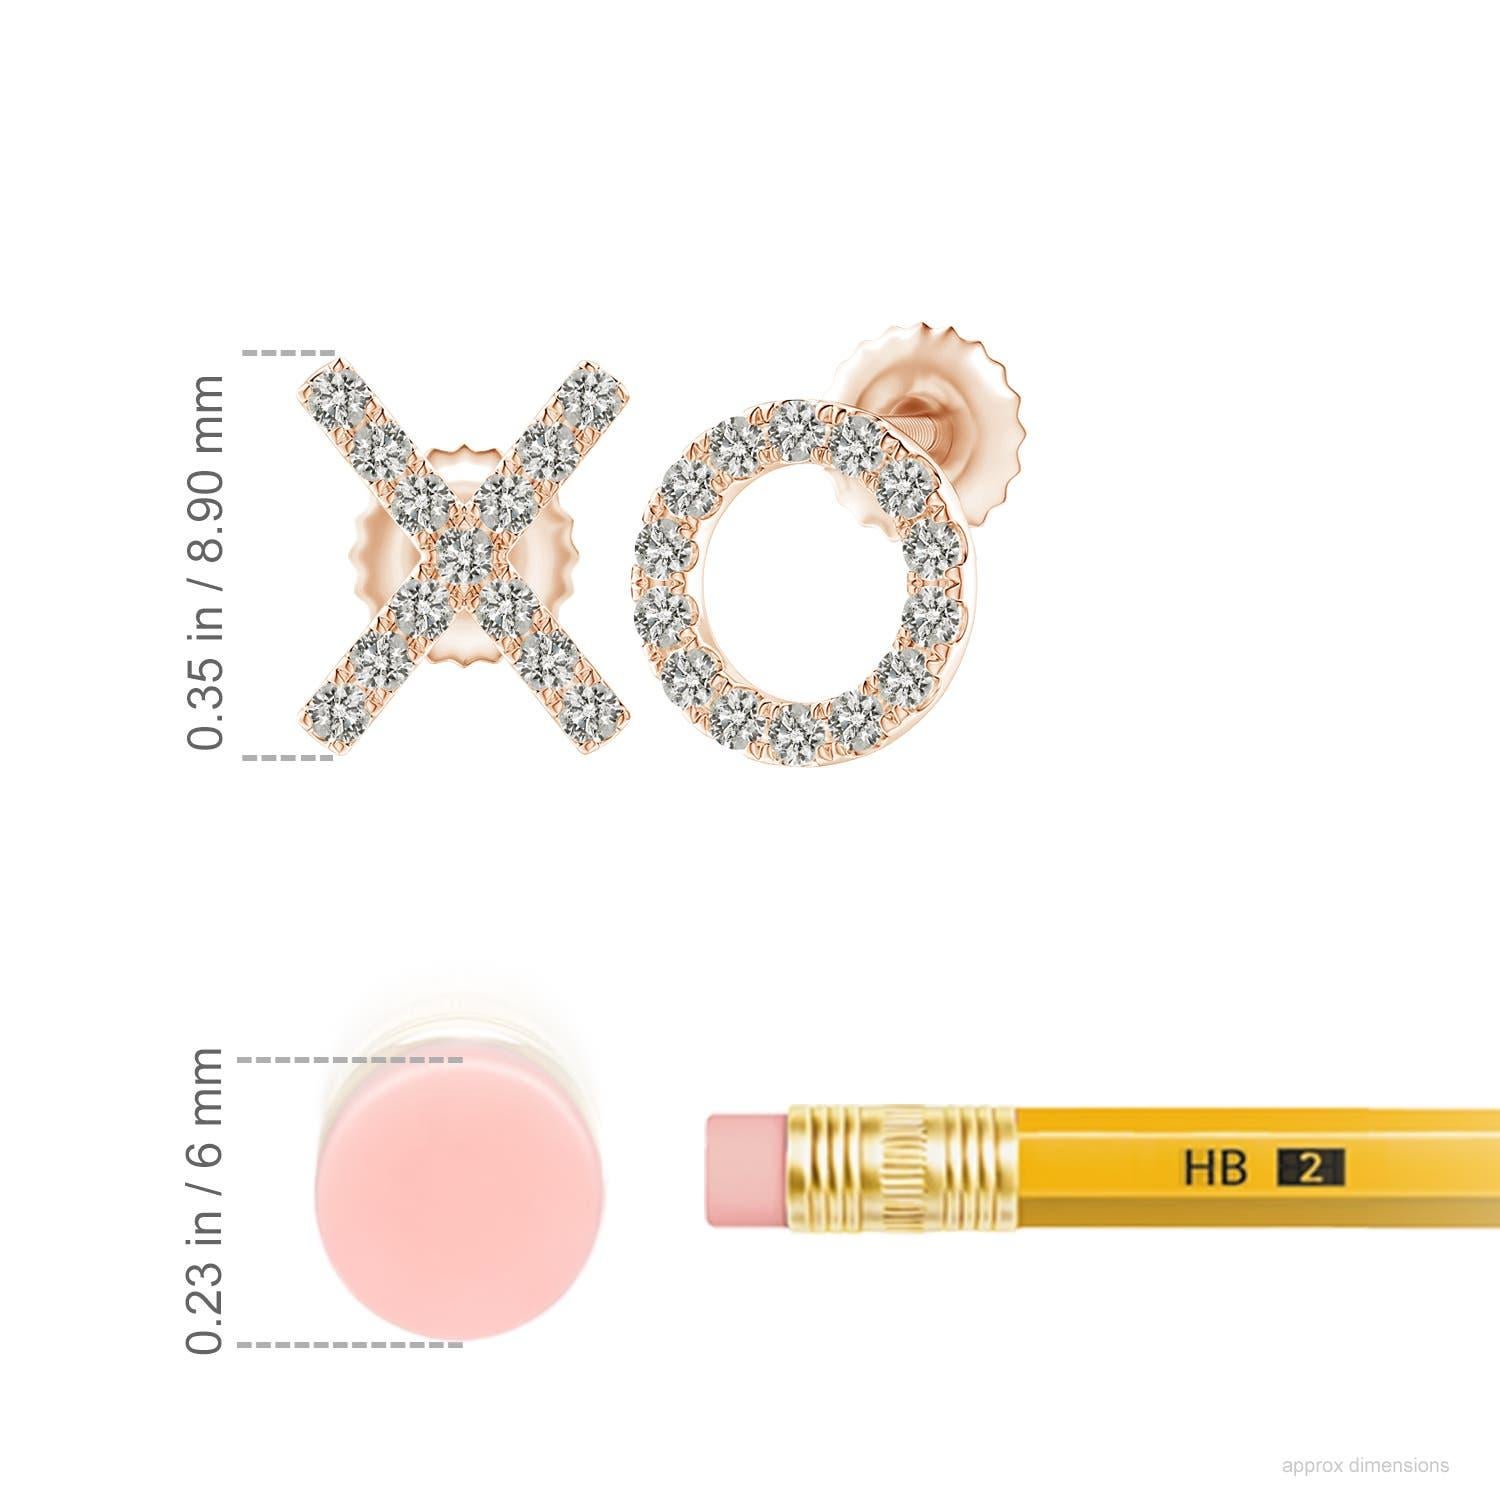 The XO stud earrings designed in 14k rose gold are simply fascinating. Sparkling round diamonds in a U pava setting brilliantly embellish the XO pattern, adding a dazzling touch to these adorable stud earrings.
Diamond is the Birthstone for April